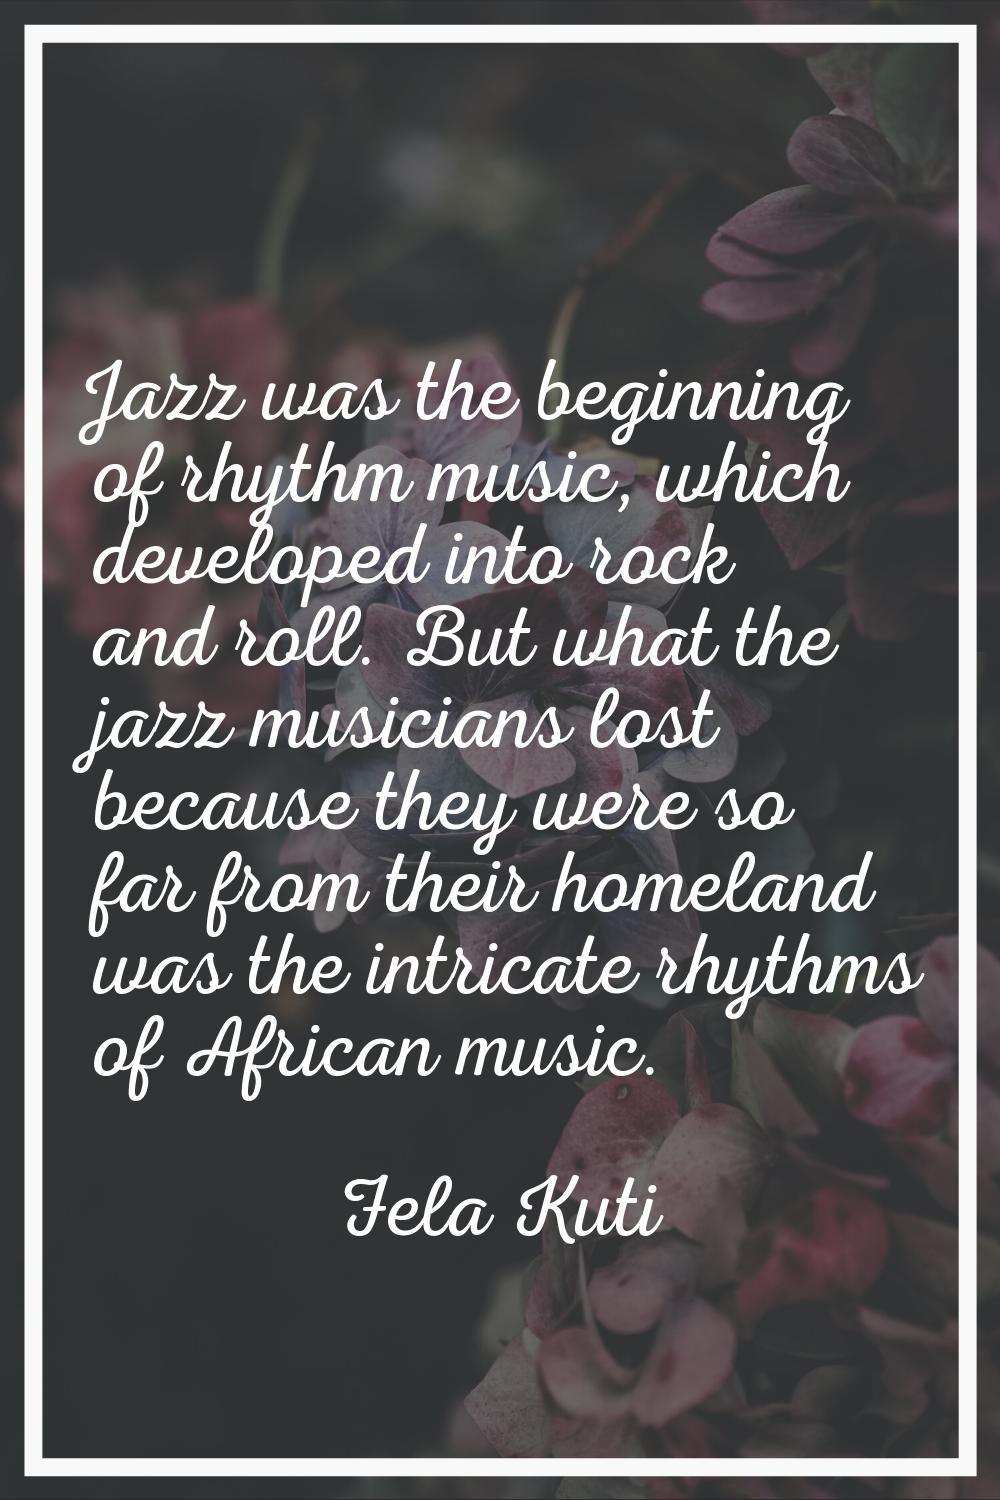 Jazz was the beginning of rhythm music, which developed into rock and roll. But what the jazz music